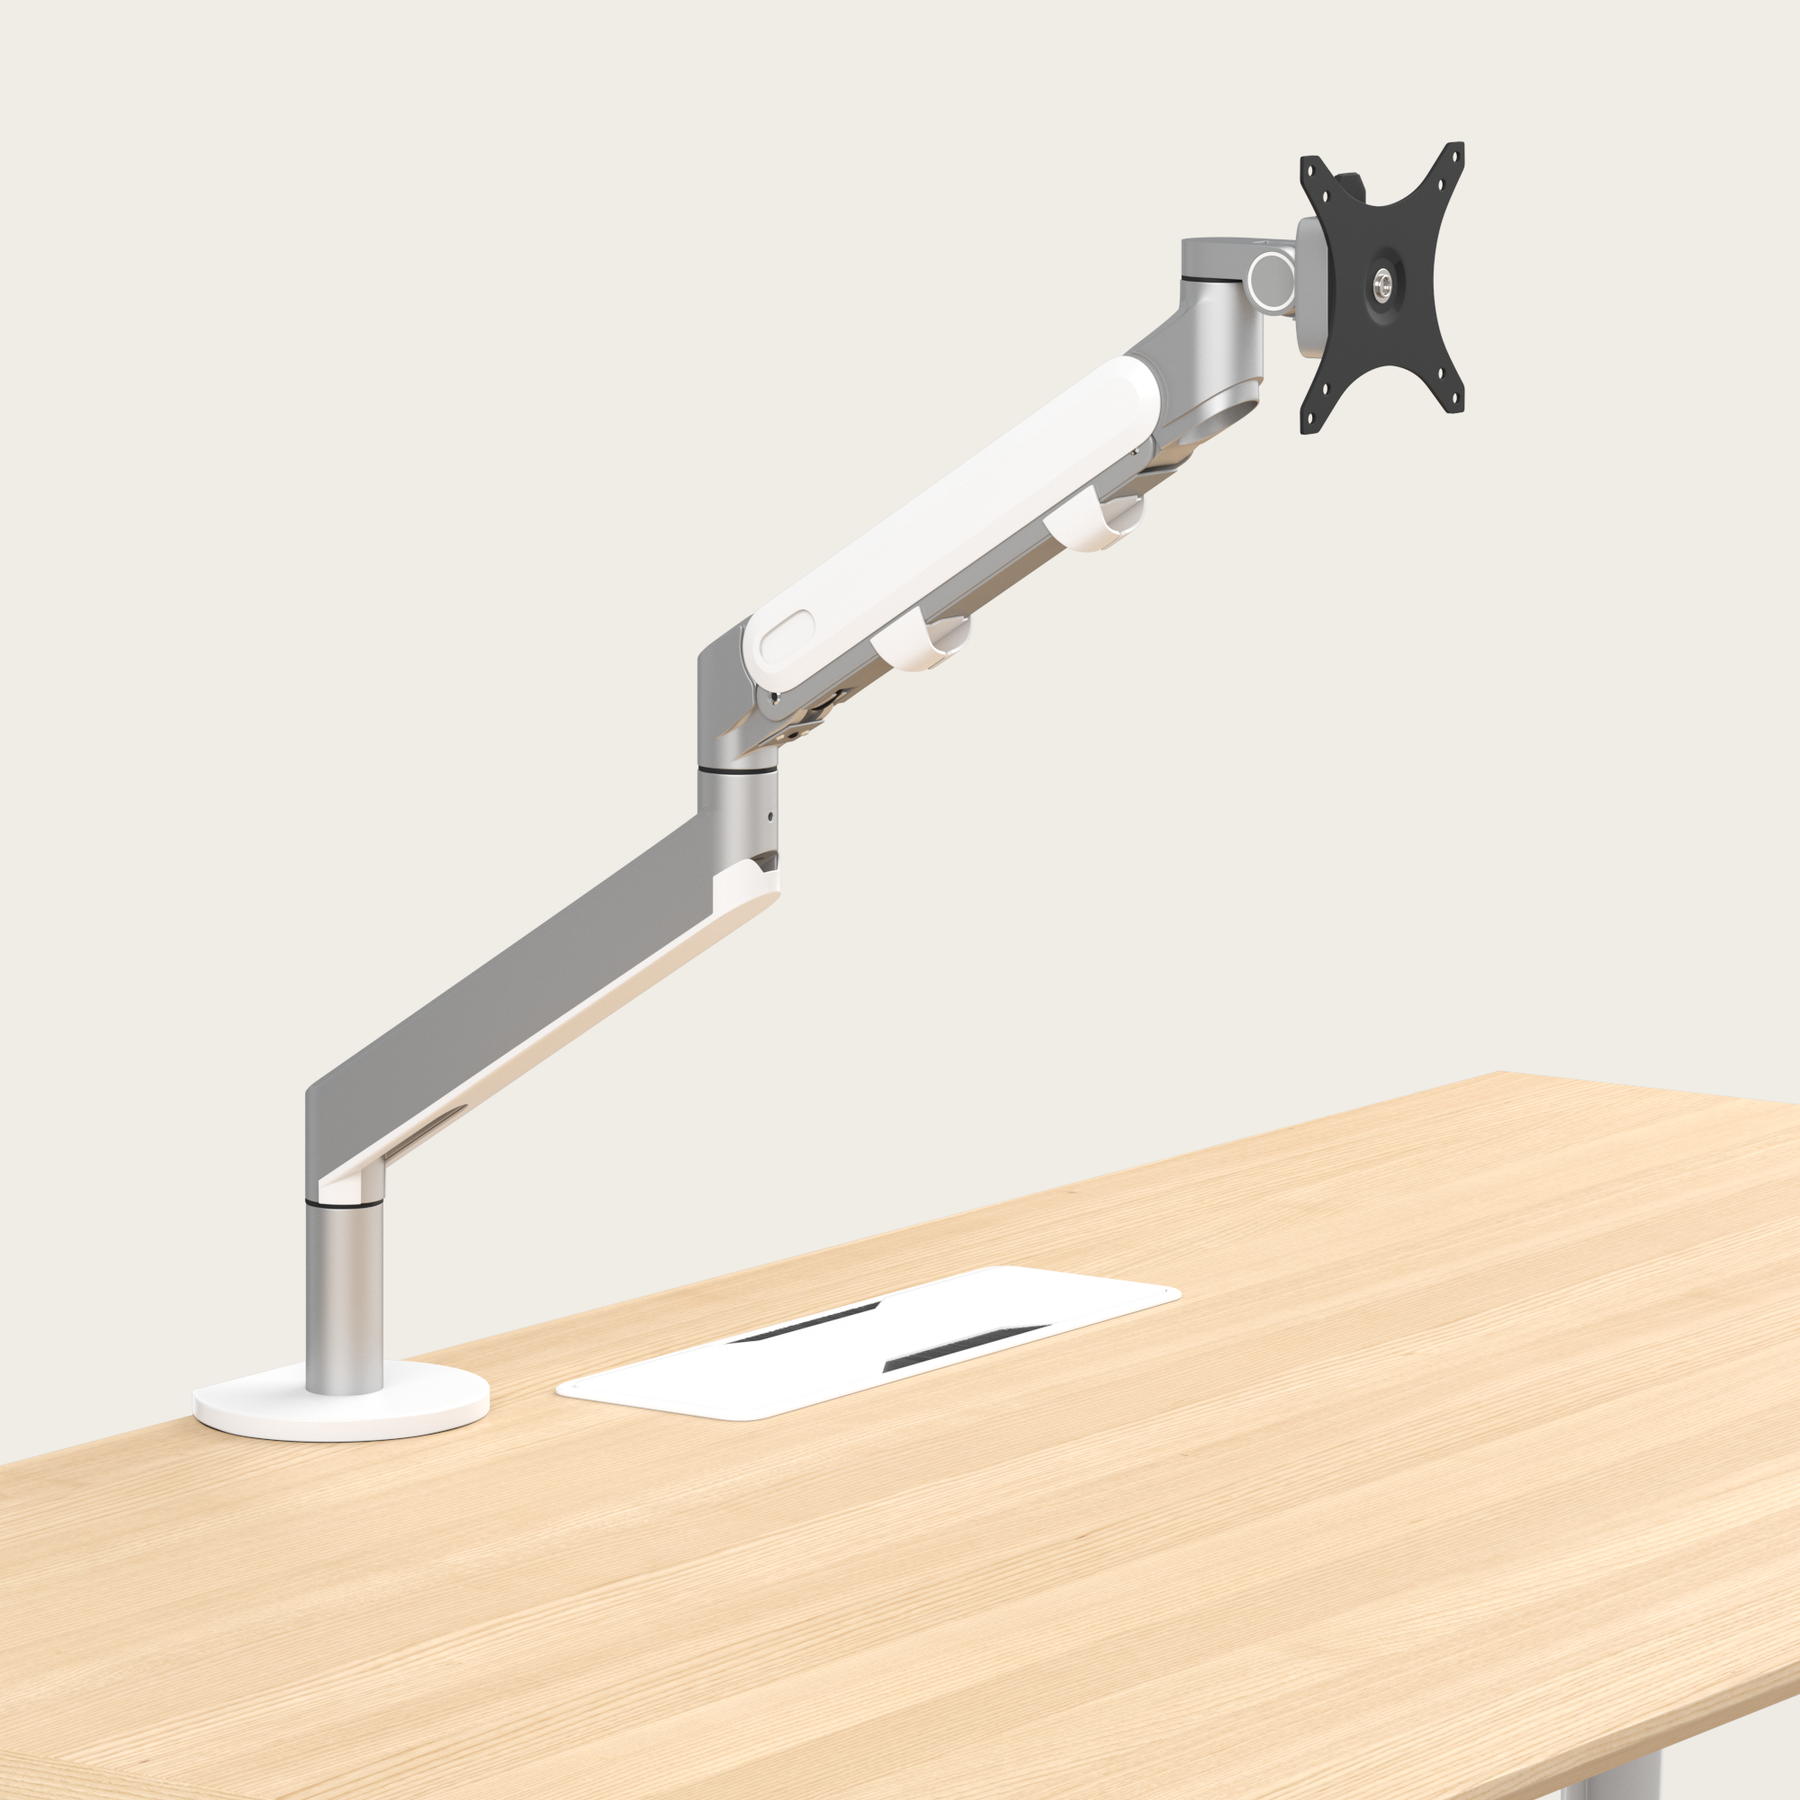 Side view of Recess monitor arm mounted on Recess single desk